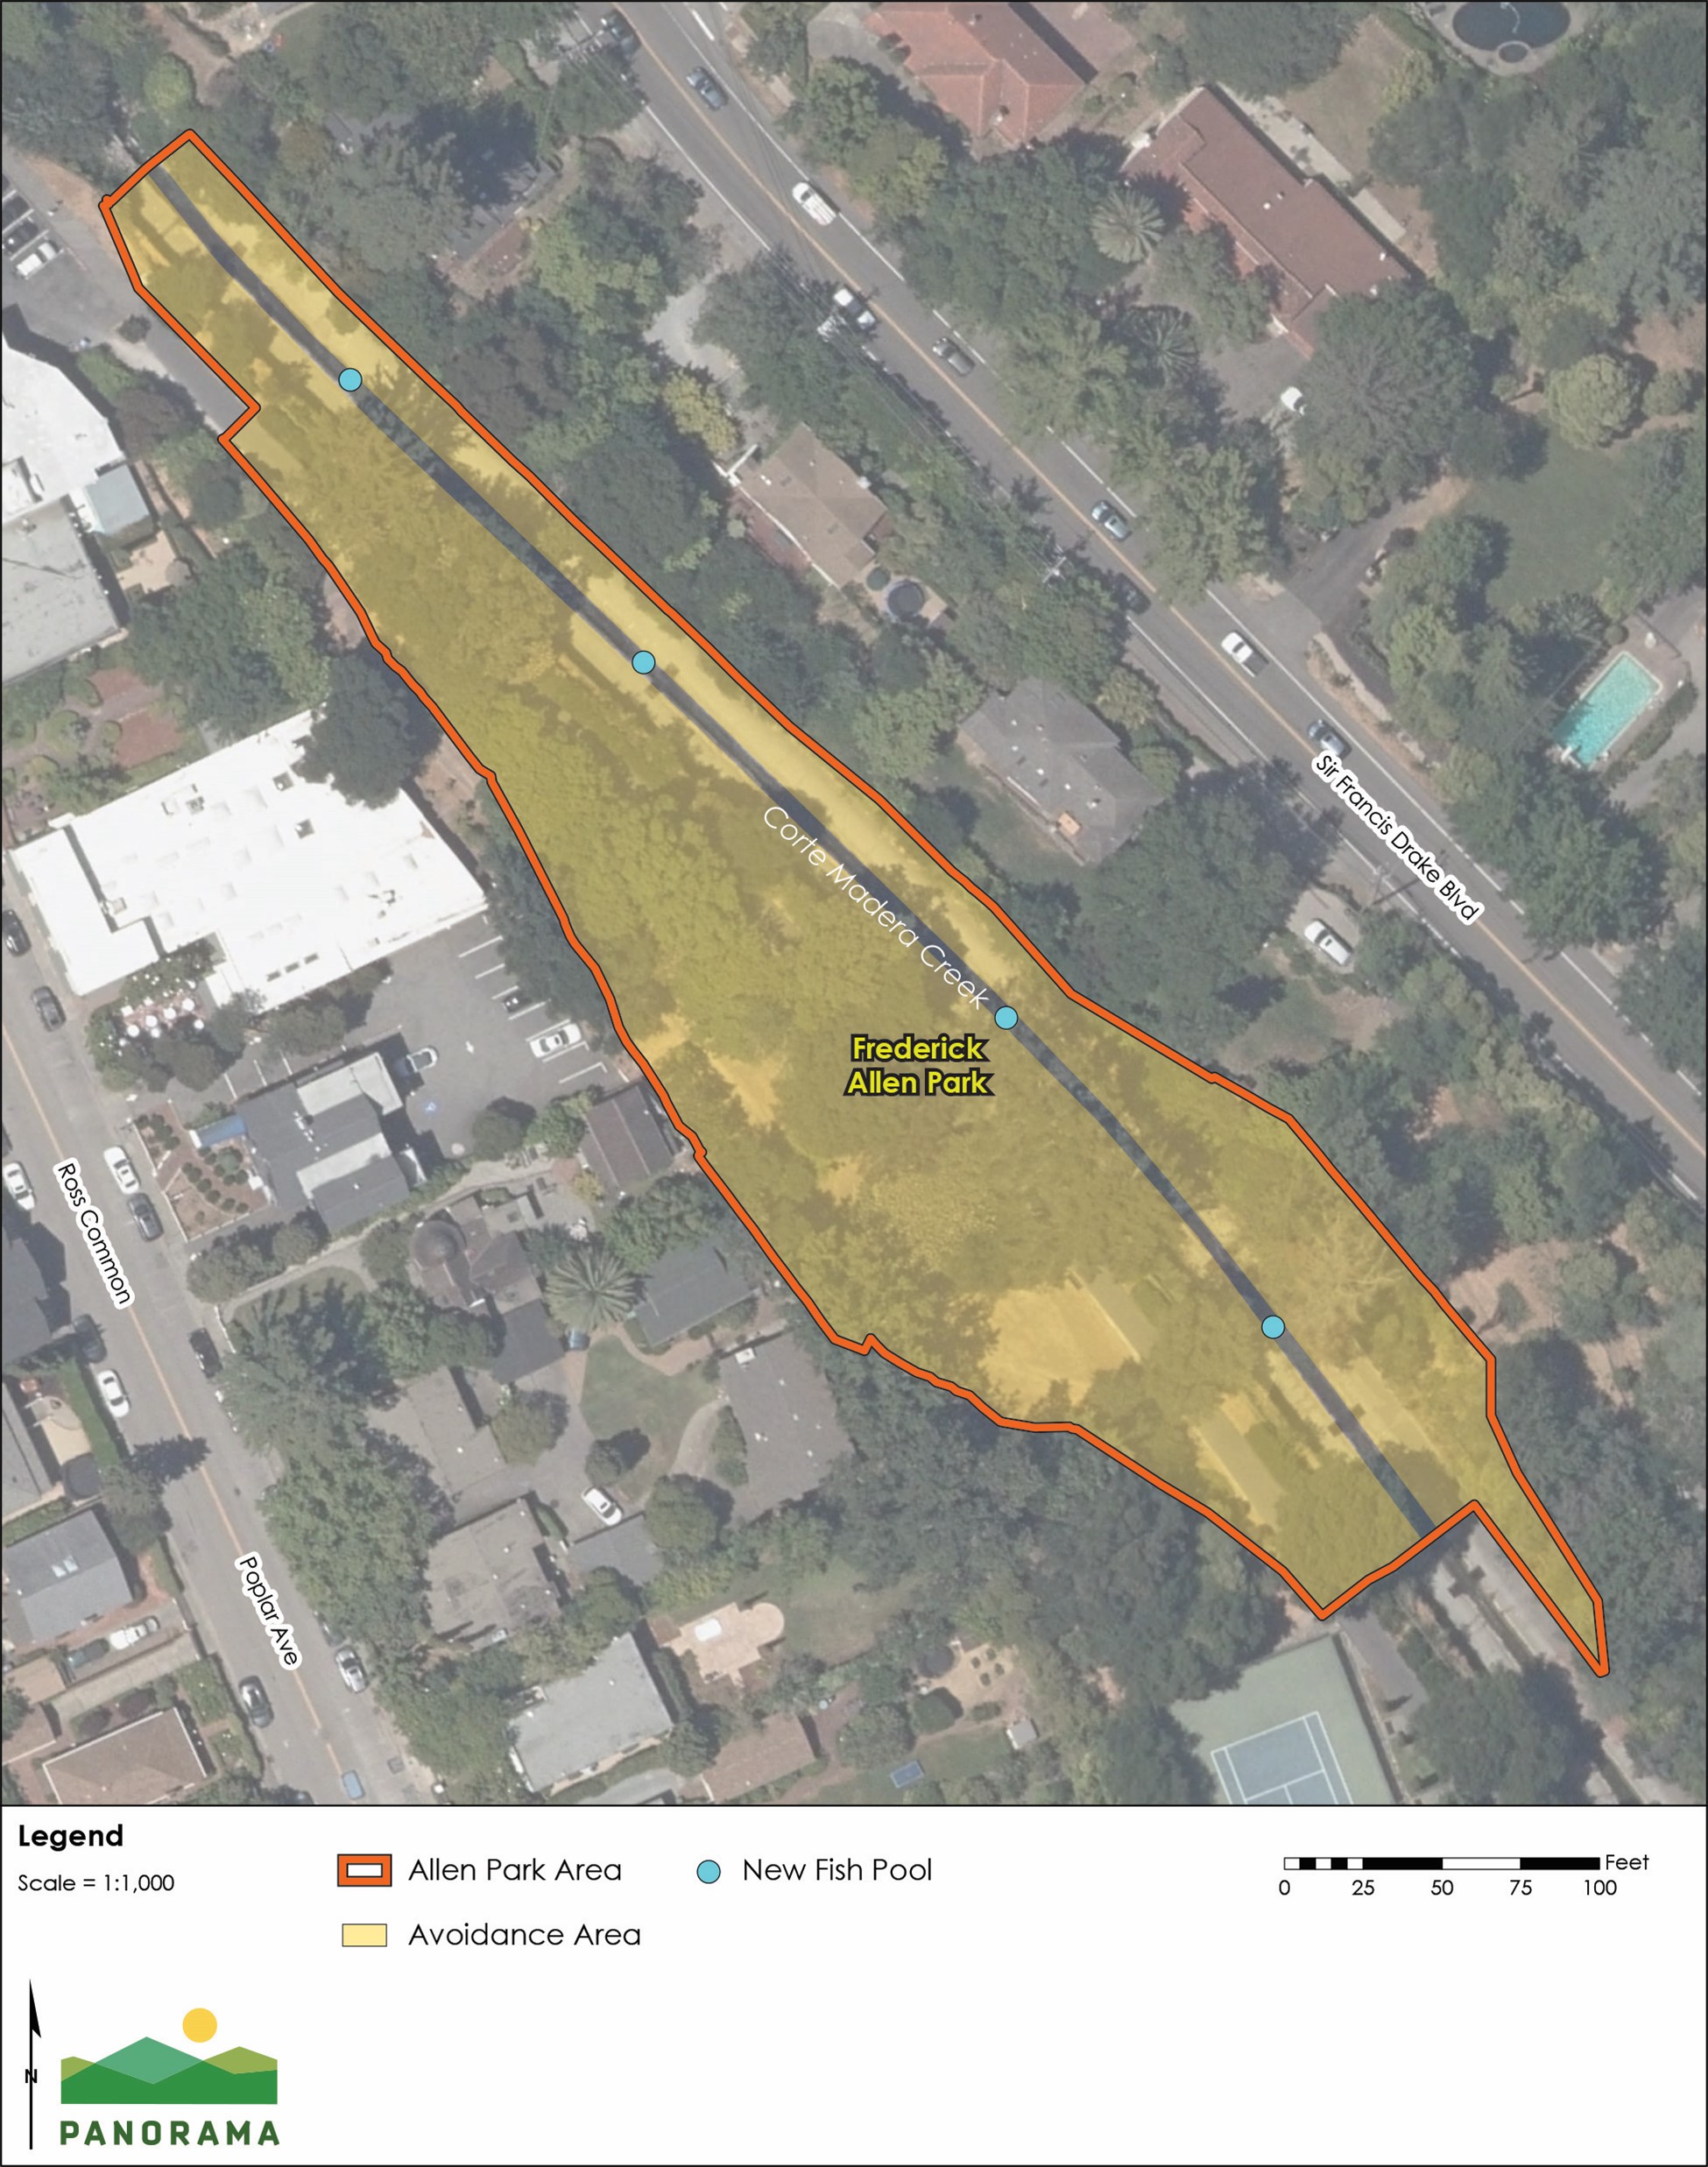 map of Alternative 1 showing a reduced footprint that avoids Frederick Allen Park